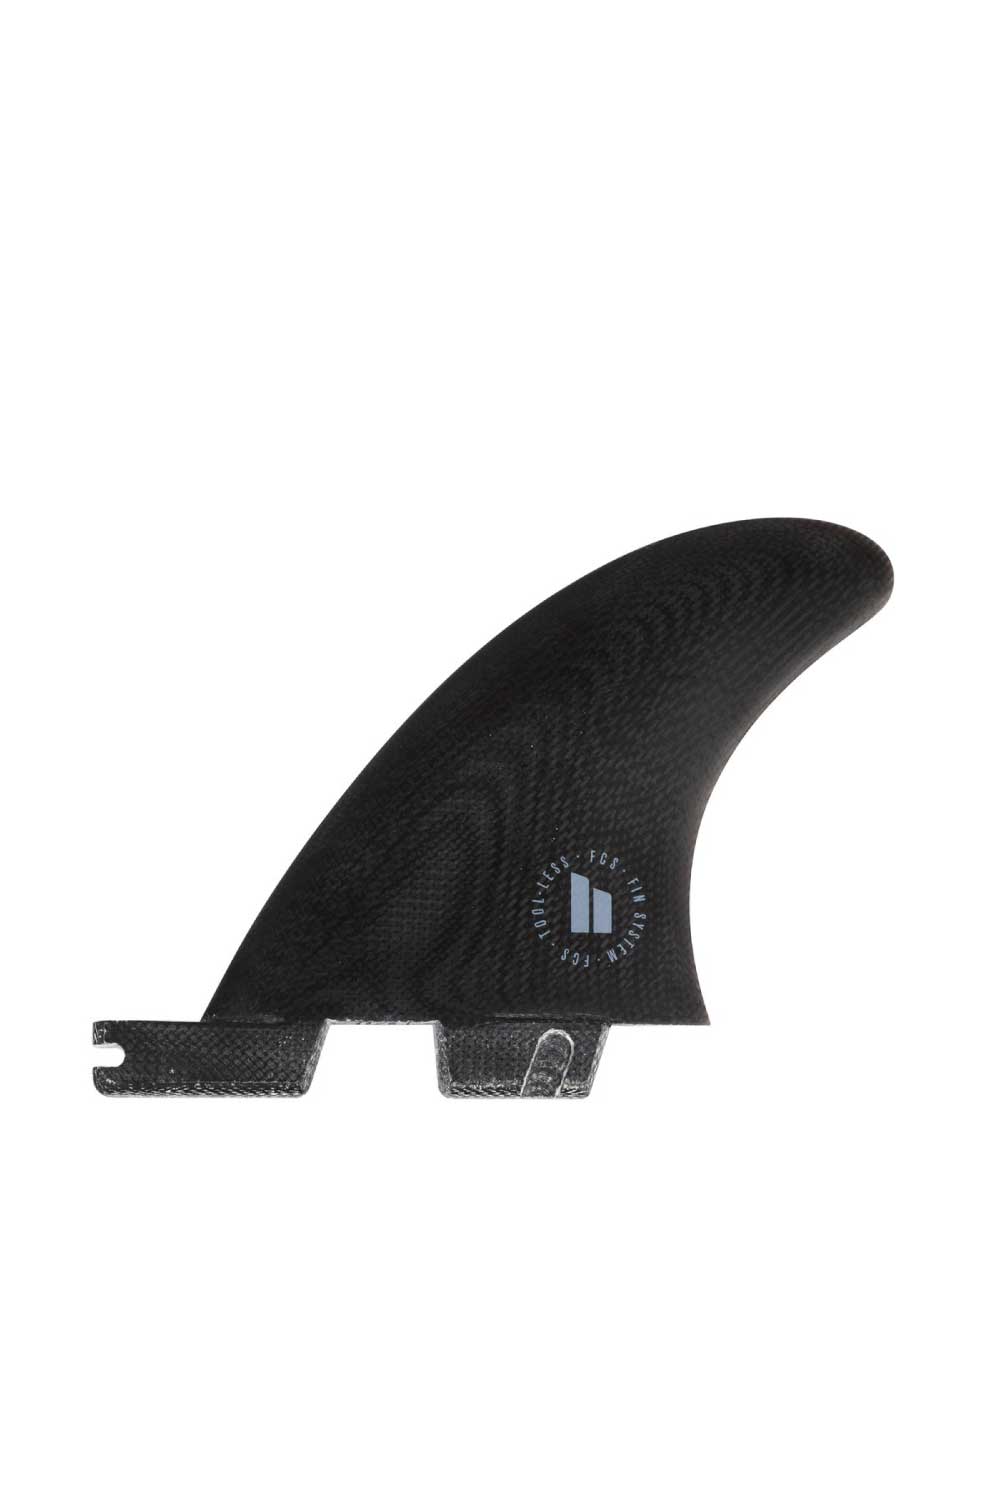 FCS2 Carver PG Small Side Byte Fins